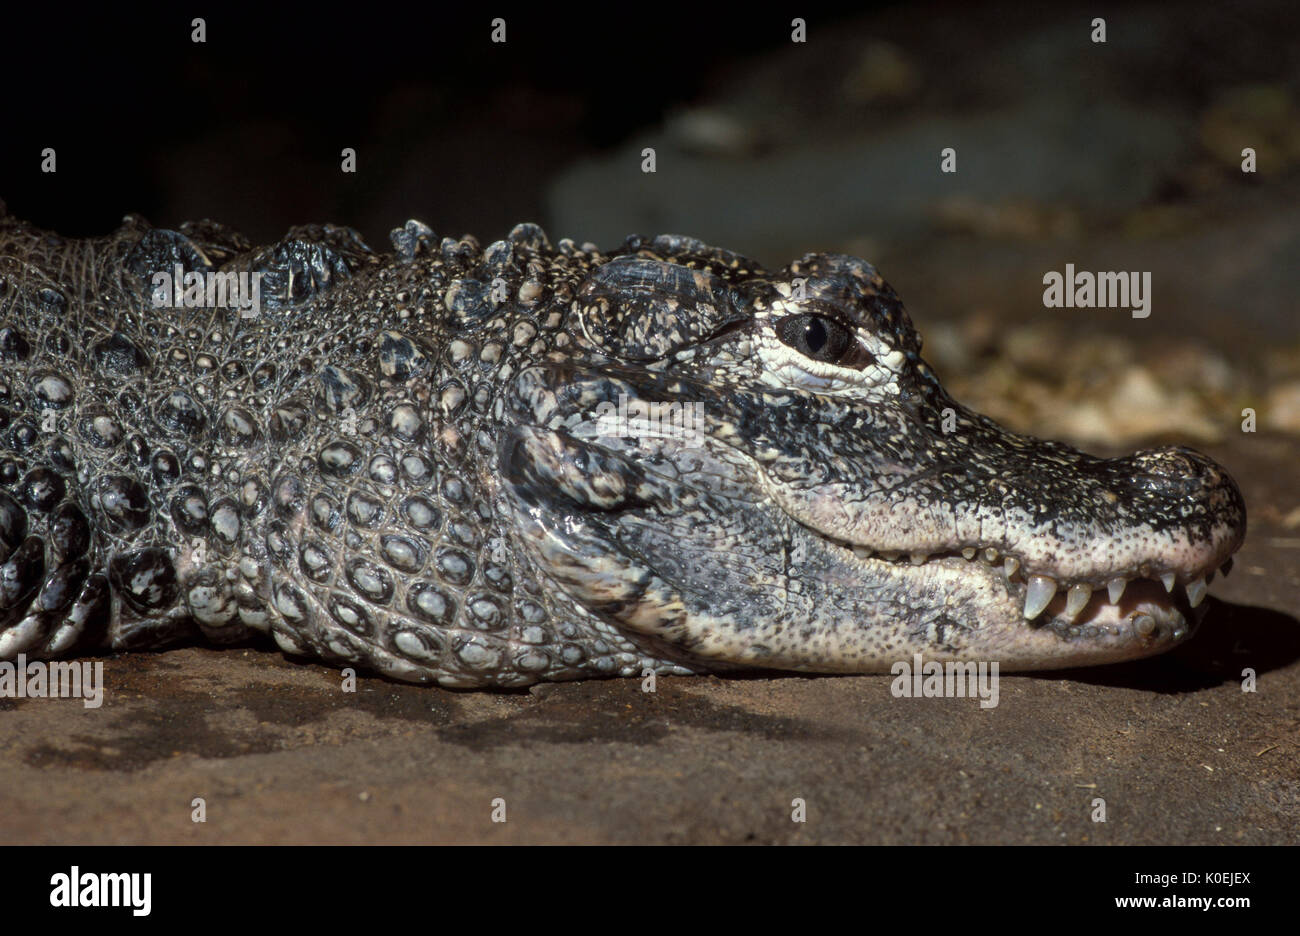 Chinese Alligator (Alligator sinensis) close up of face, showing eyes and teeth, captive Stock Photo